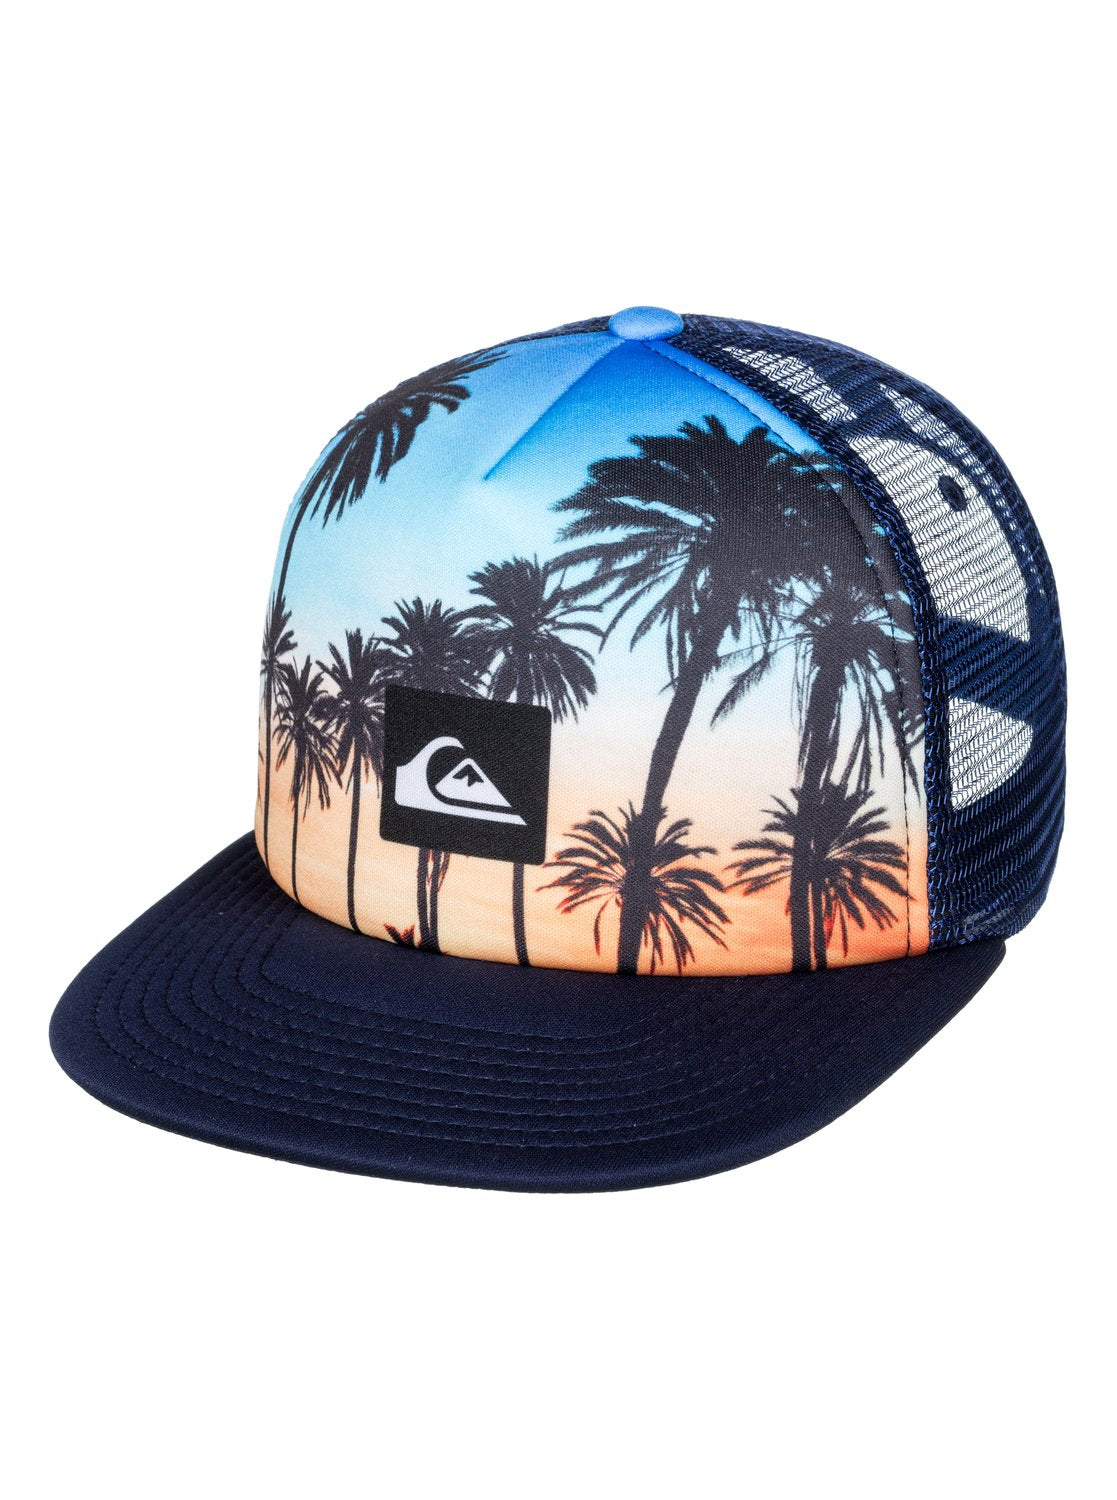 Quiksilver Mix Tape Youth Trucker Hat